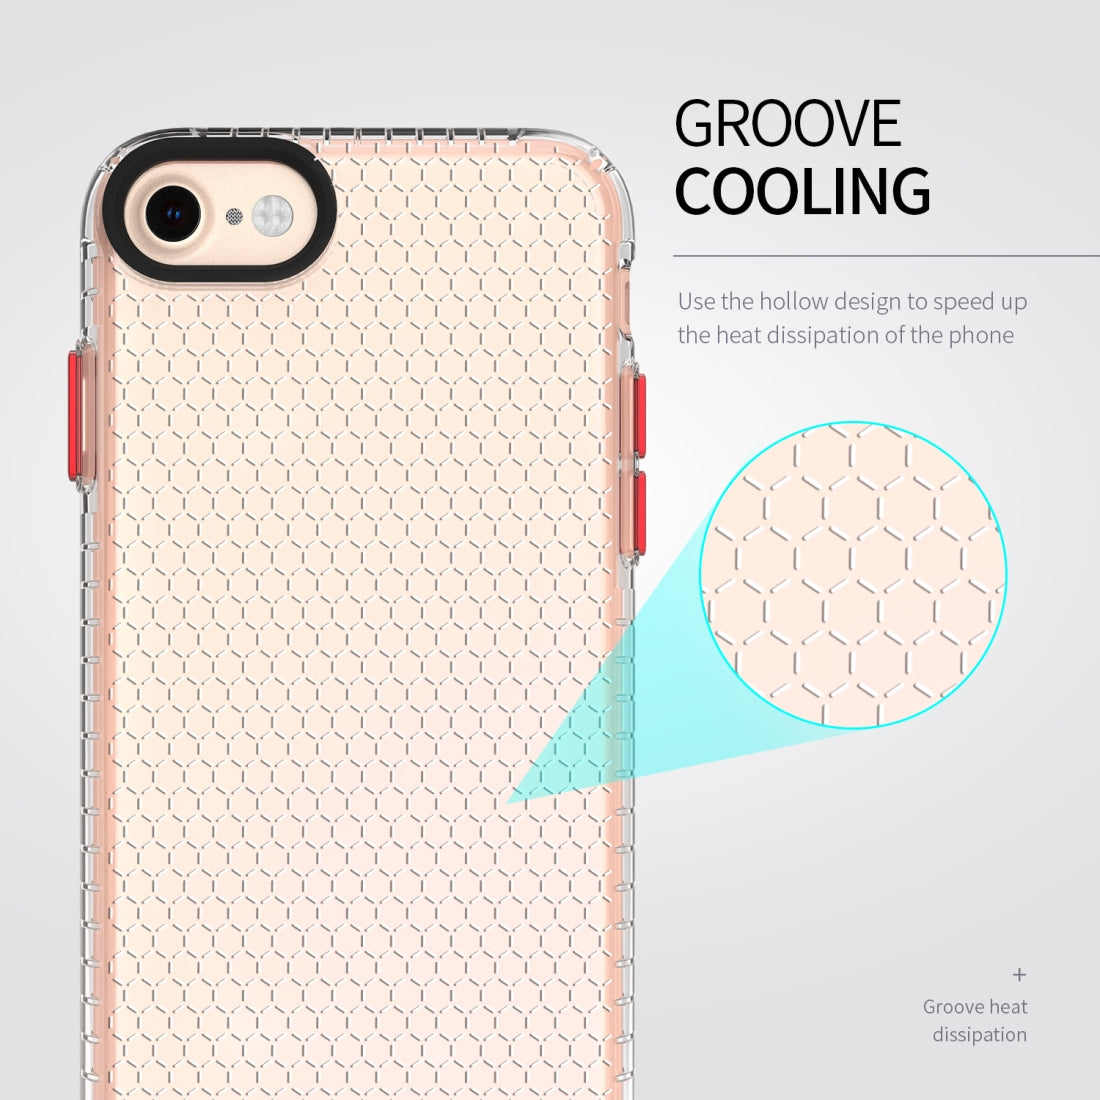 For iPhone 8 / 7 / 6 Honeycomb Shockproof TPU Case(Blue)